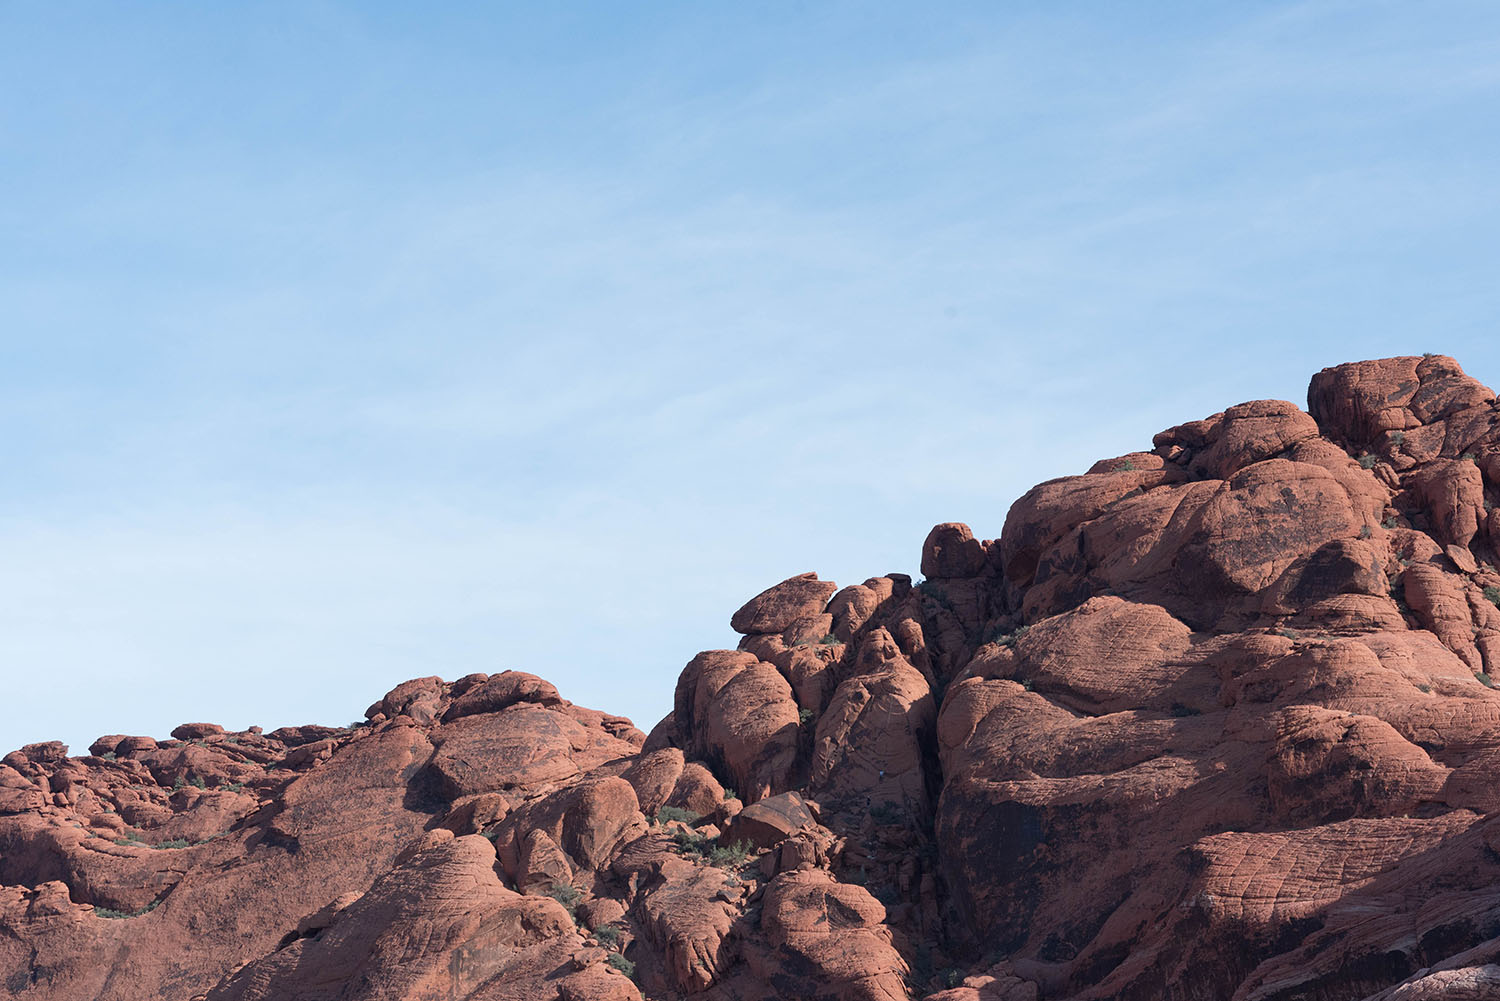 Red boulders against a blue sky at Red Rock Canyon in Nevada, as photographed by Canadian travel blogger Cee Fardoe of Coco & Vera